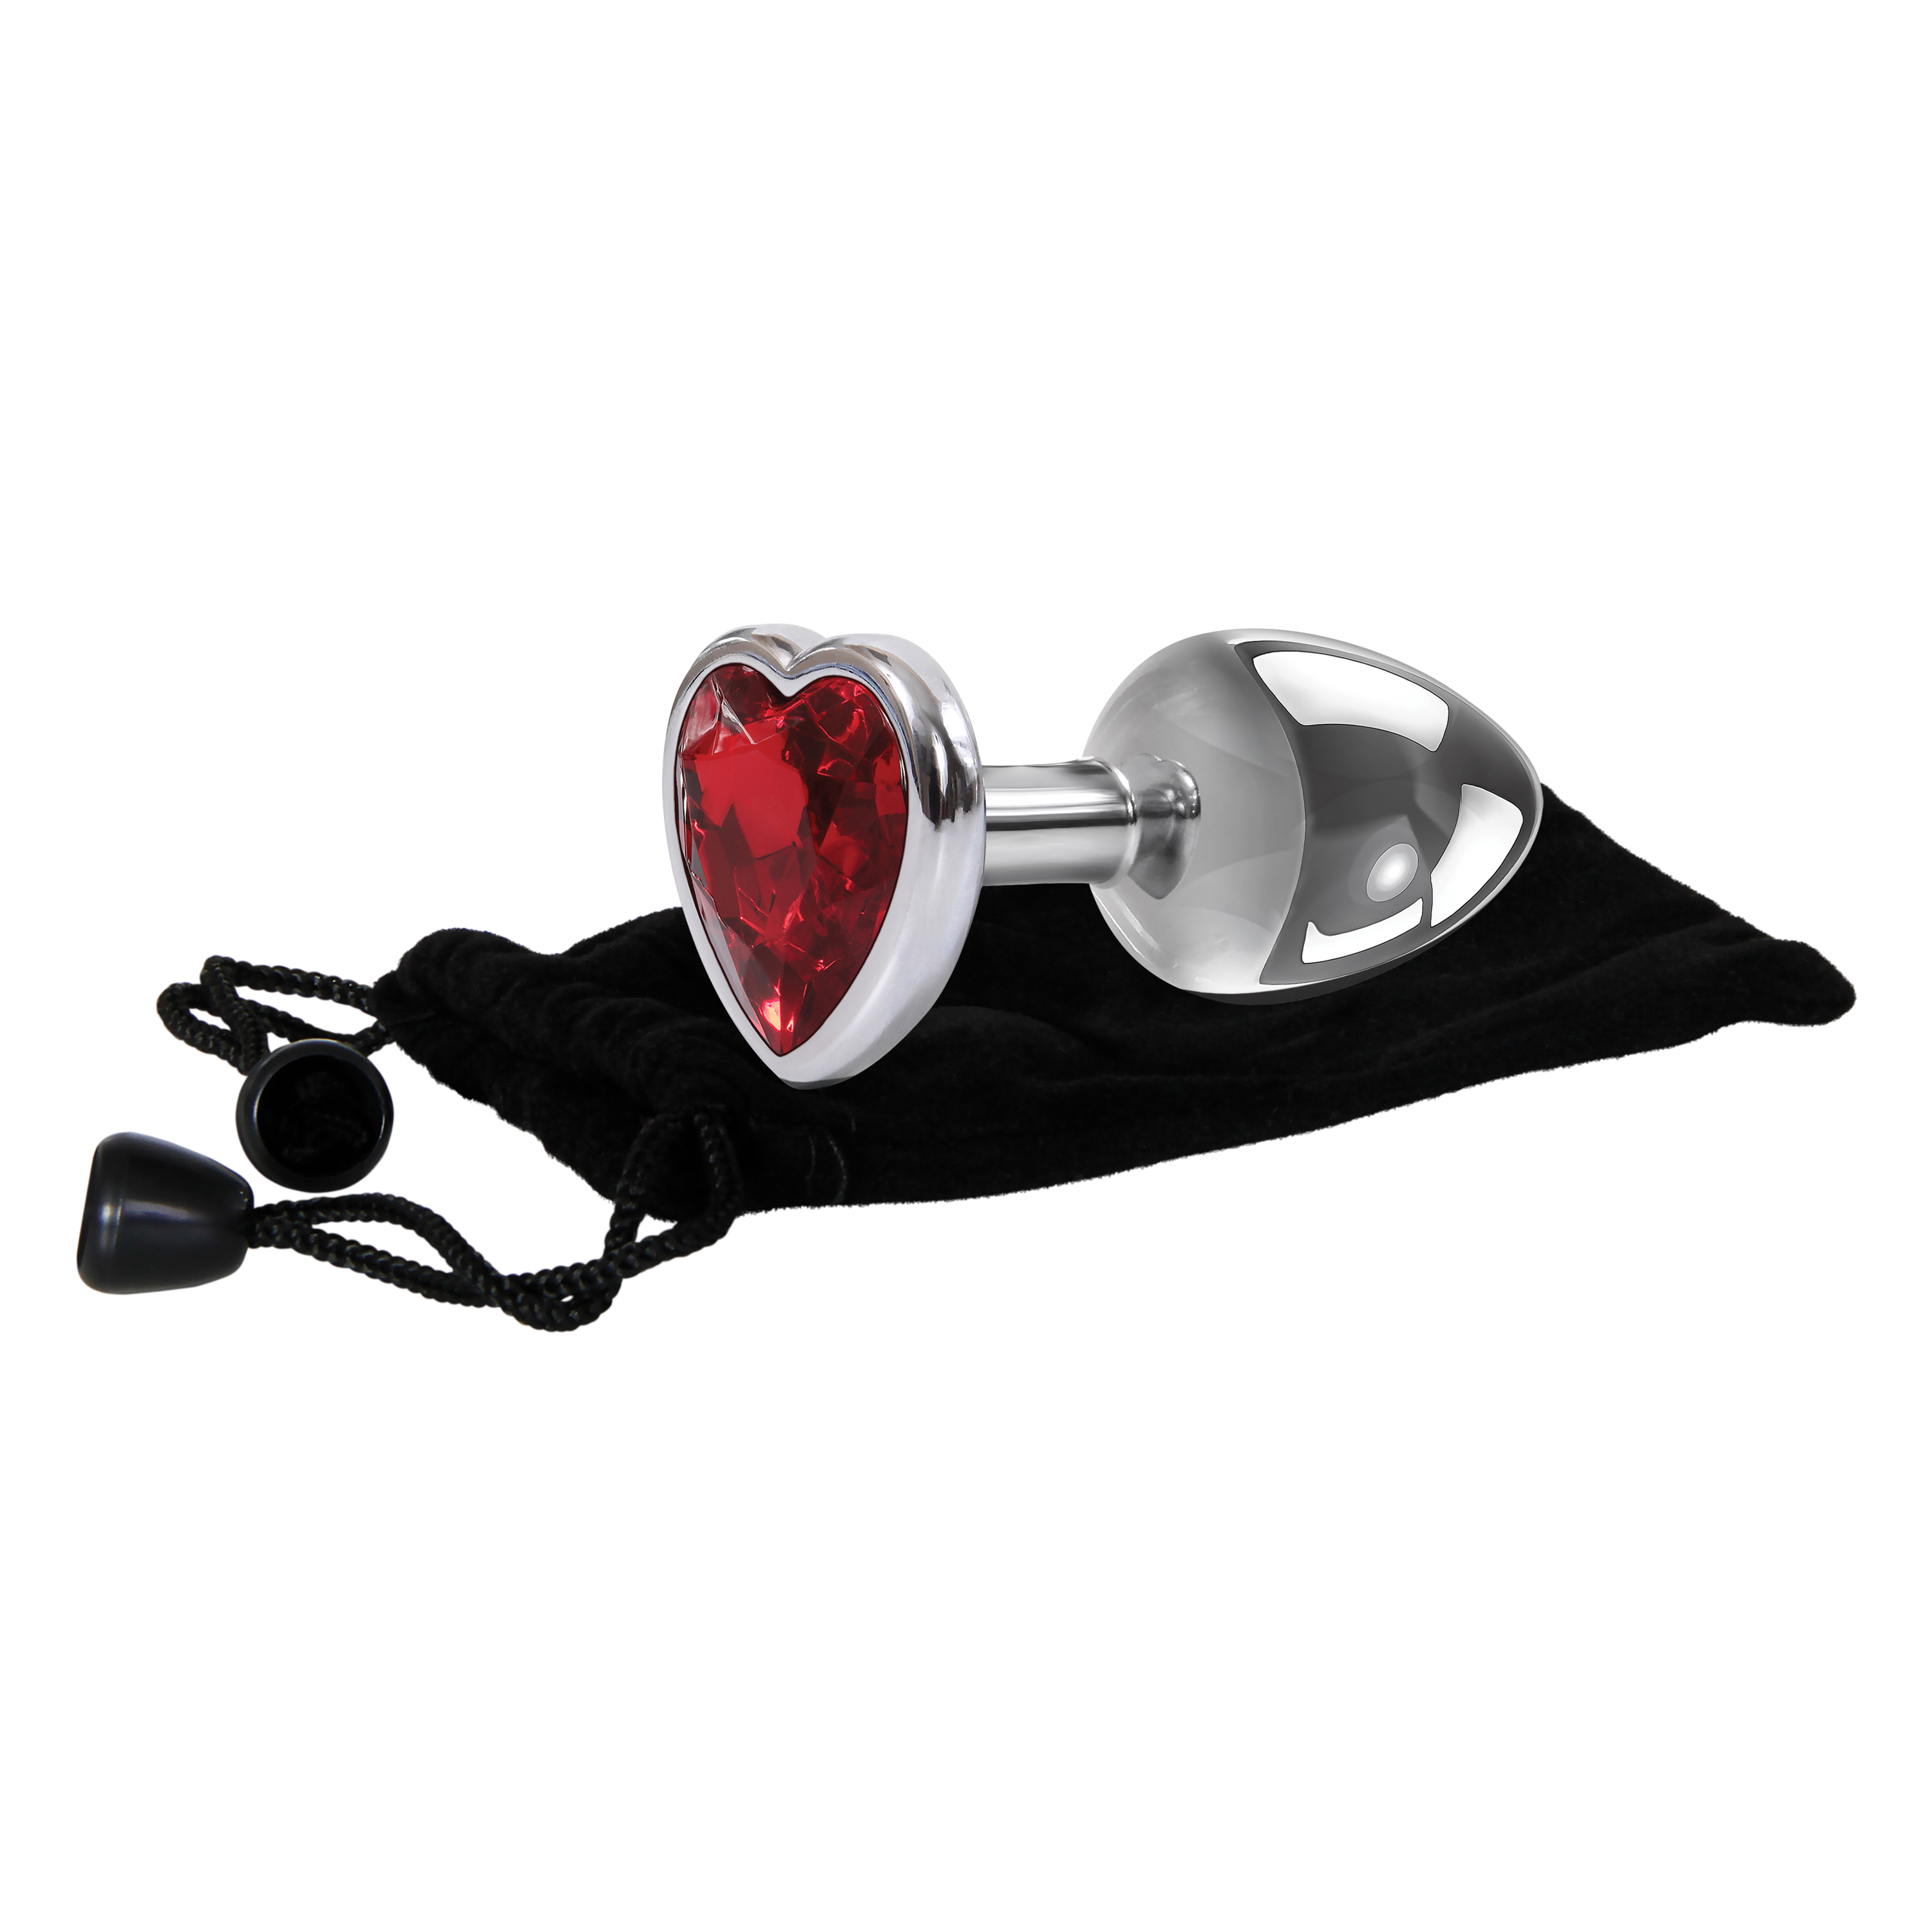 GEM ANAL PLUG RED HEART - SMALL